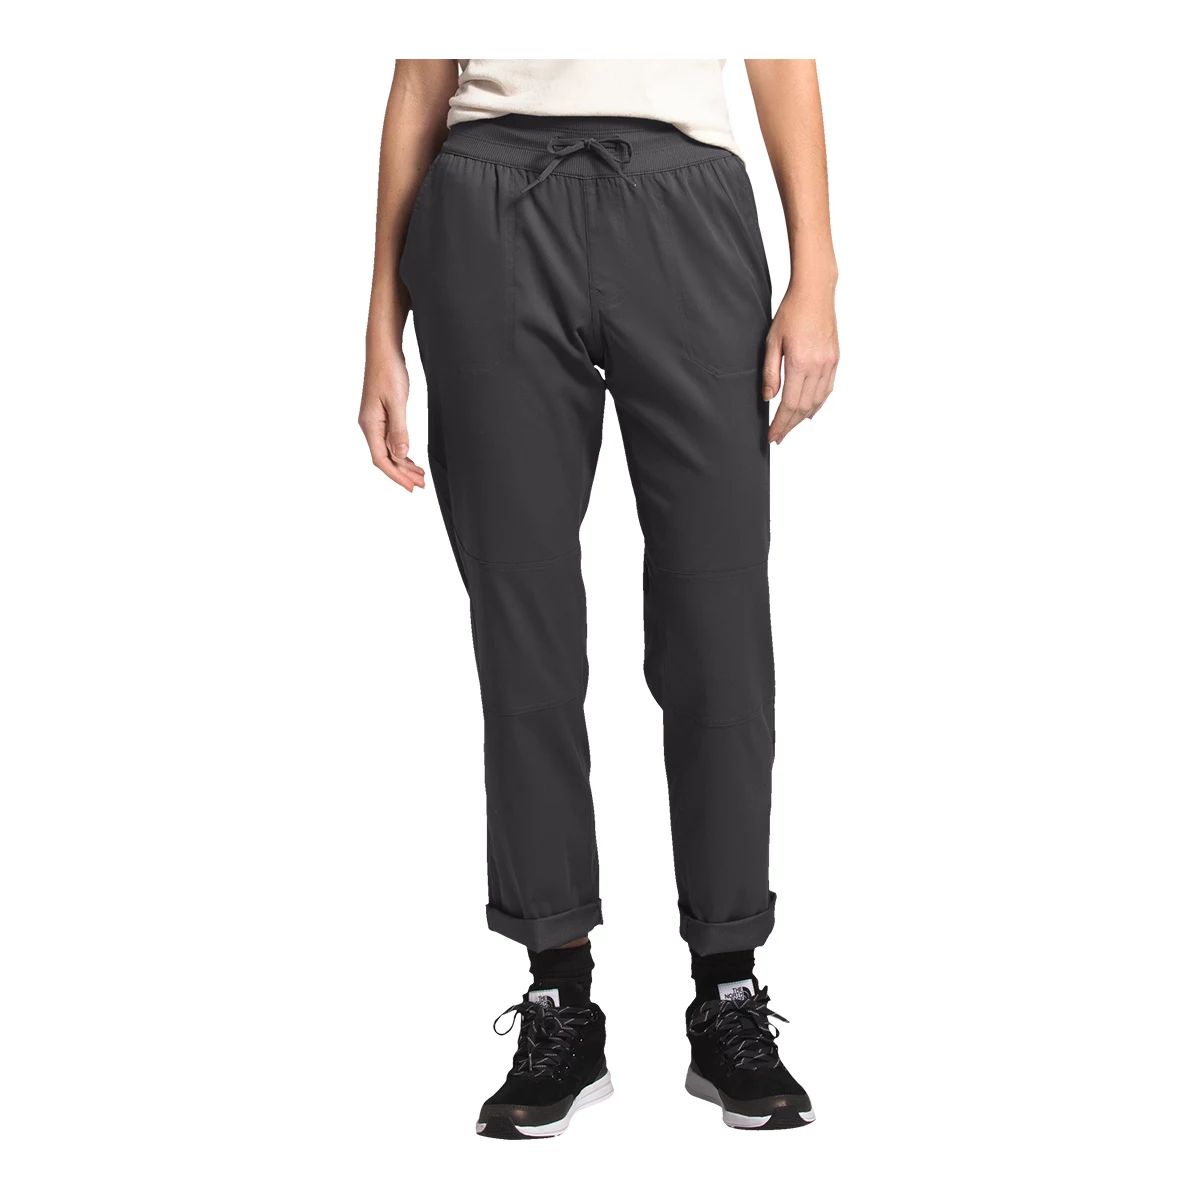 The North Face Women's Aphrodite Motion Pants Casual Training High